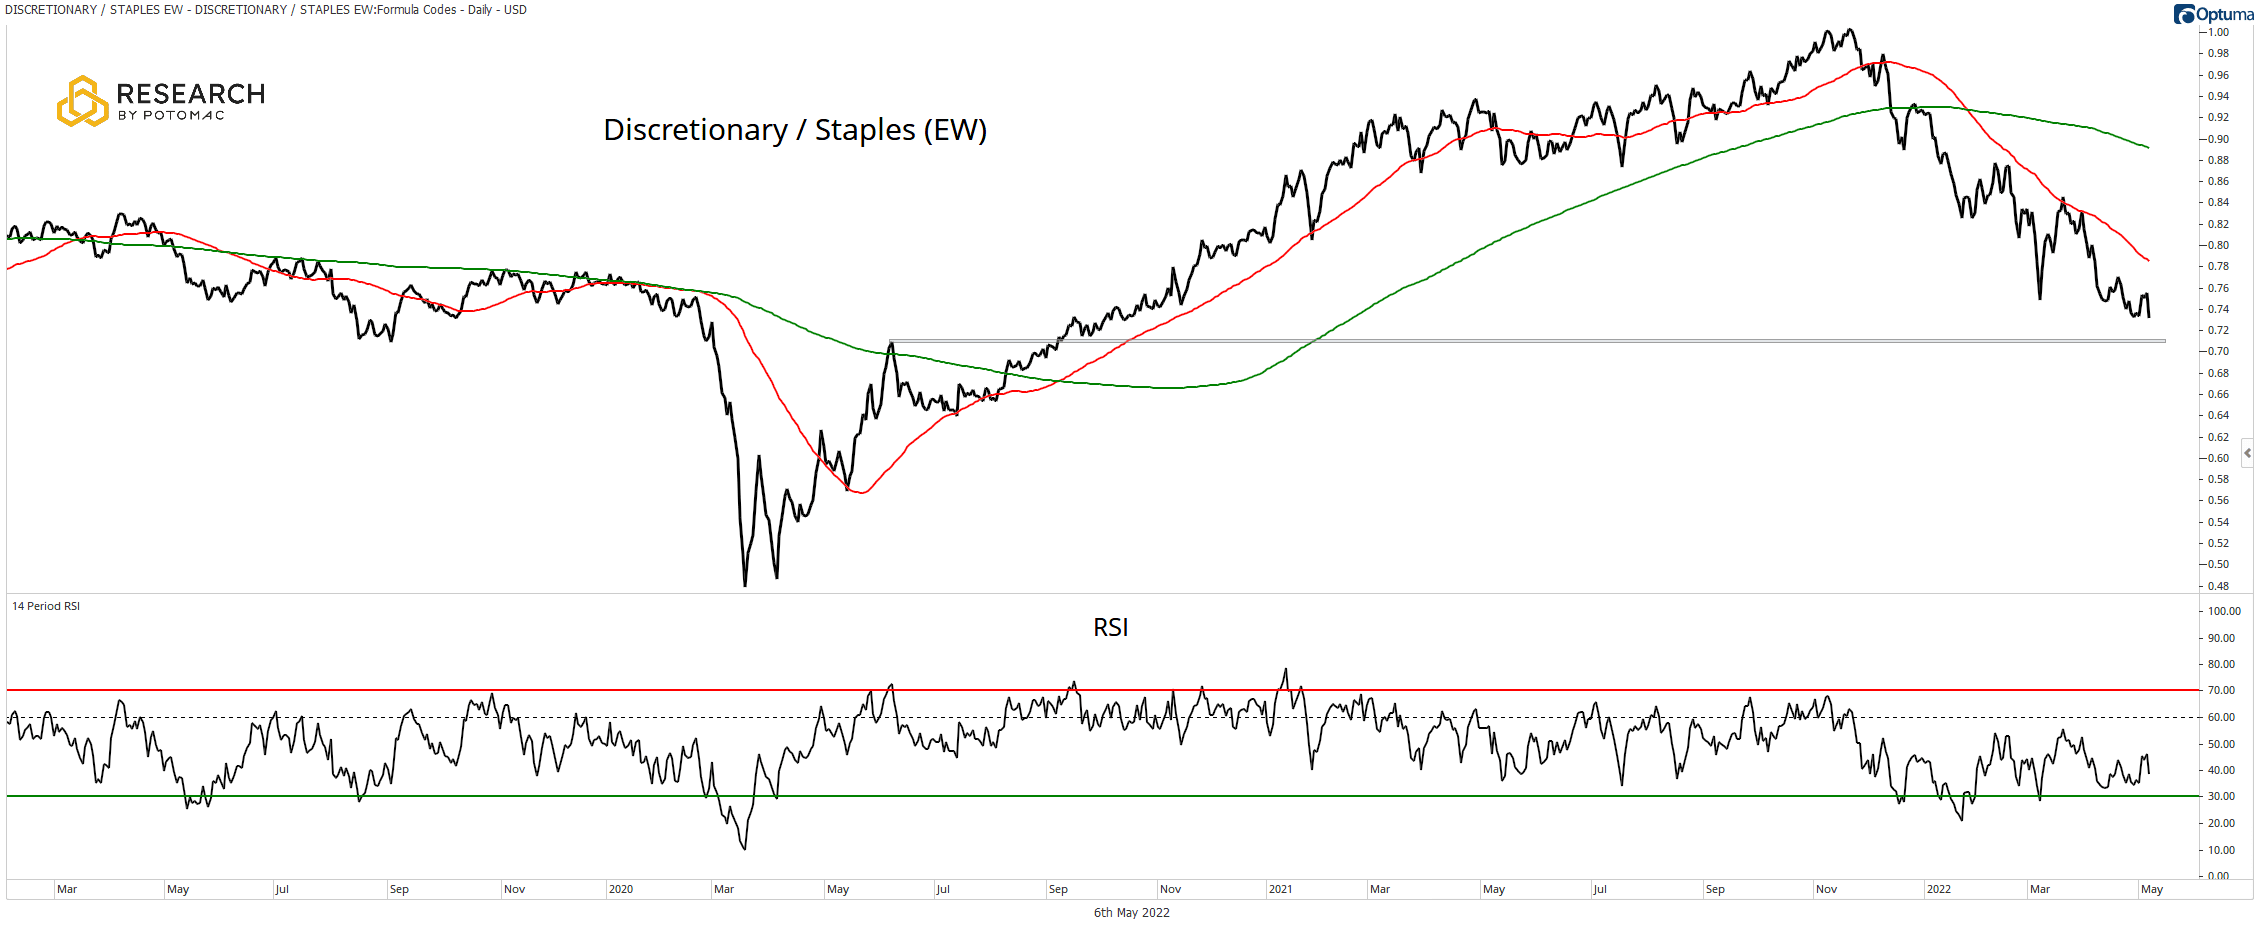 Discretionary / Staples (EW) chart for April 29th research.